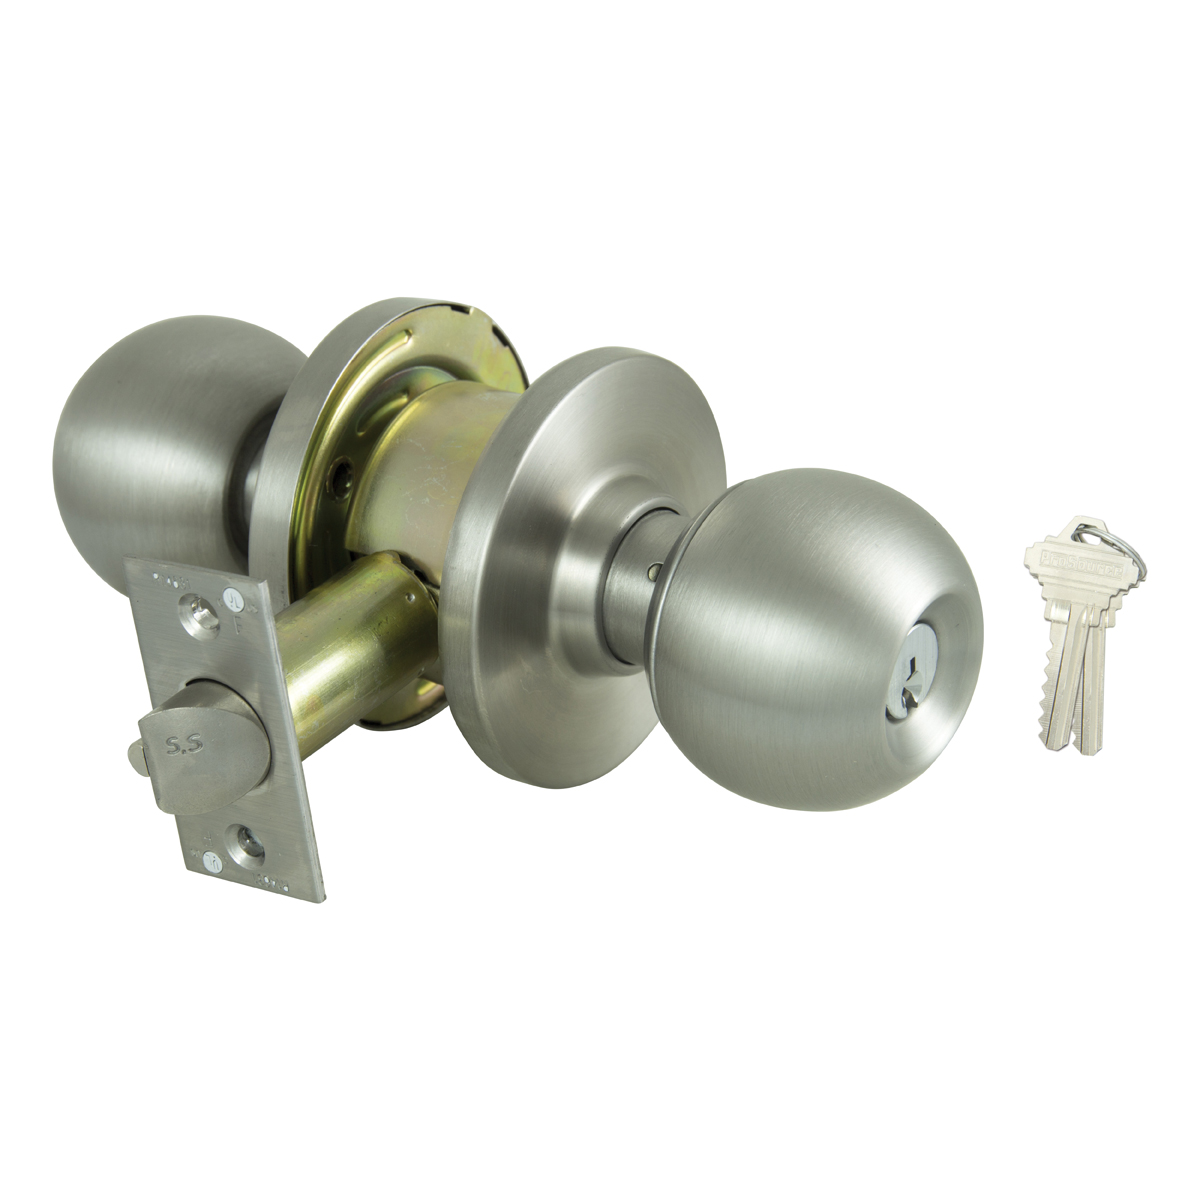 C368BV-PS Knob Set, 2 Grade, Stainless Steel, Stainless Steel, SC1 Keyway, Different Key, Commercial